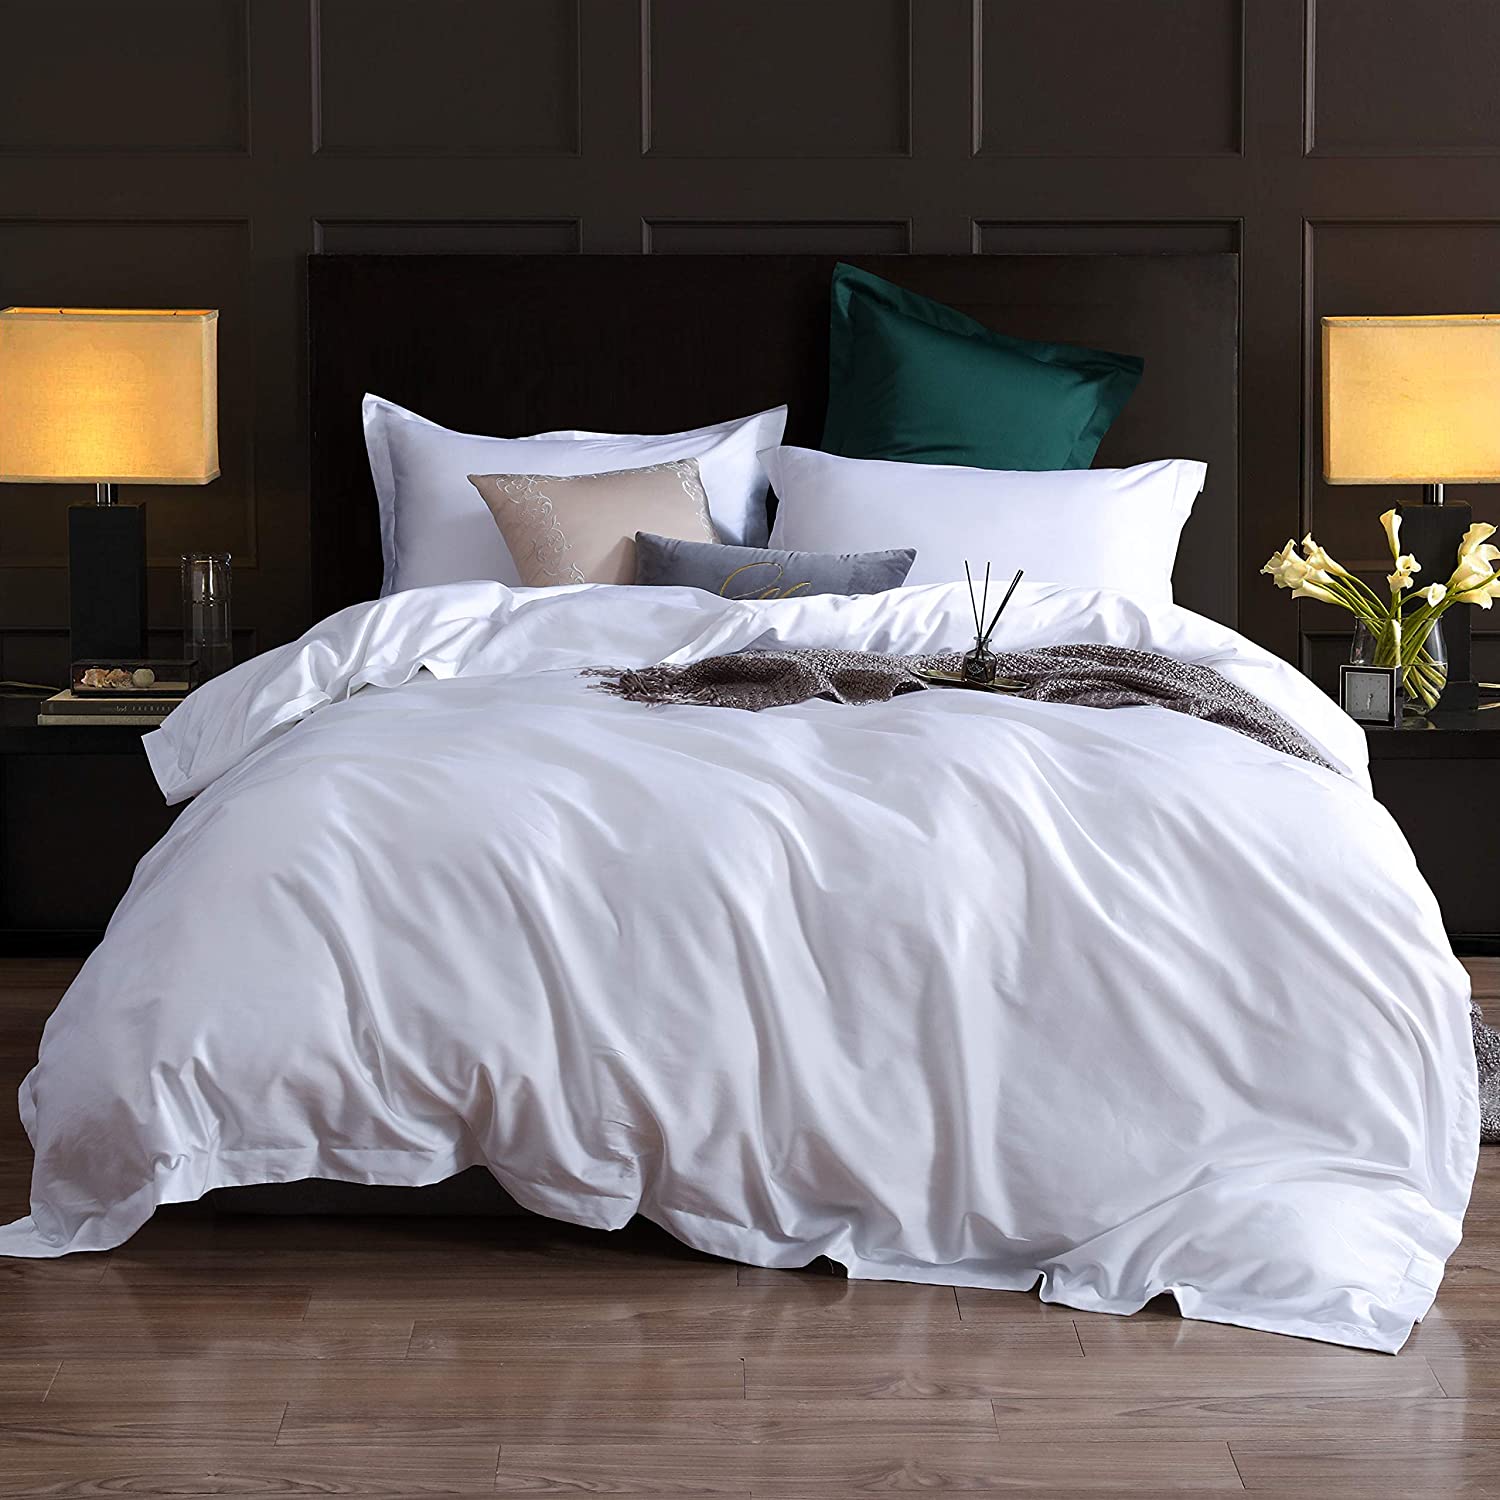 1200 Thread Count Soft Egyptian Cotton "US-Queen" Size Bedding Items New Colors